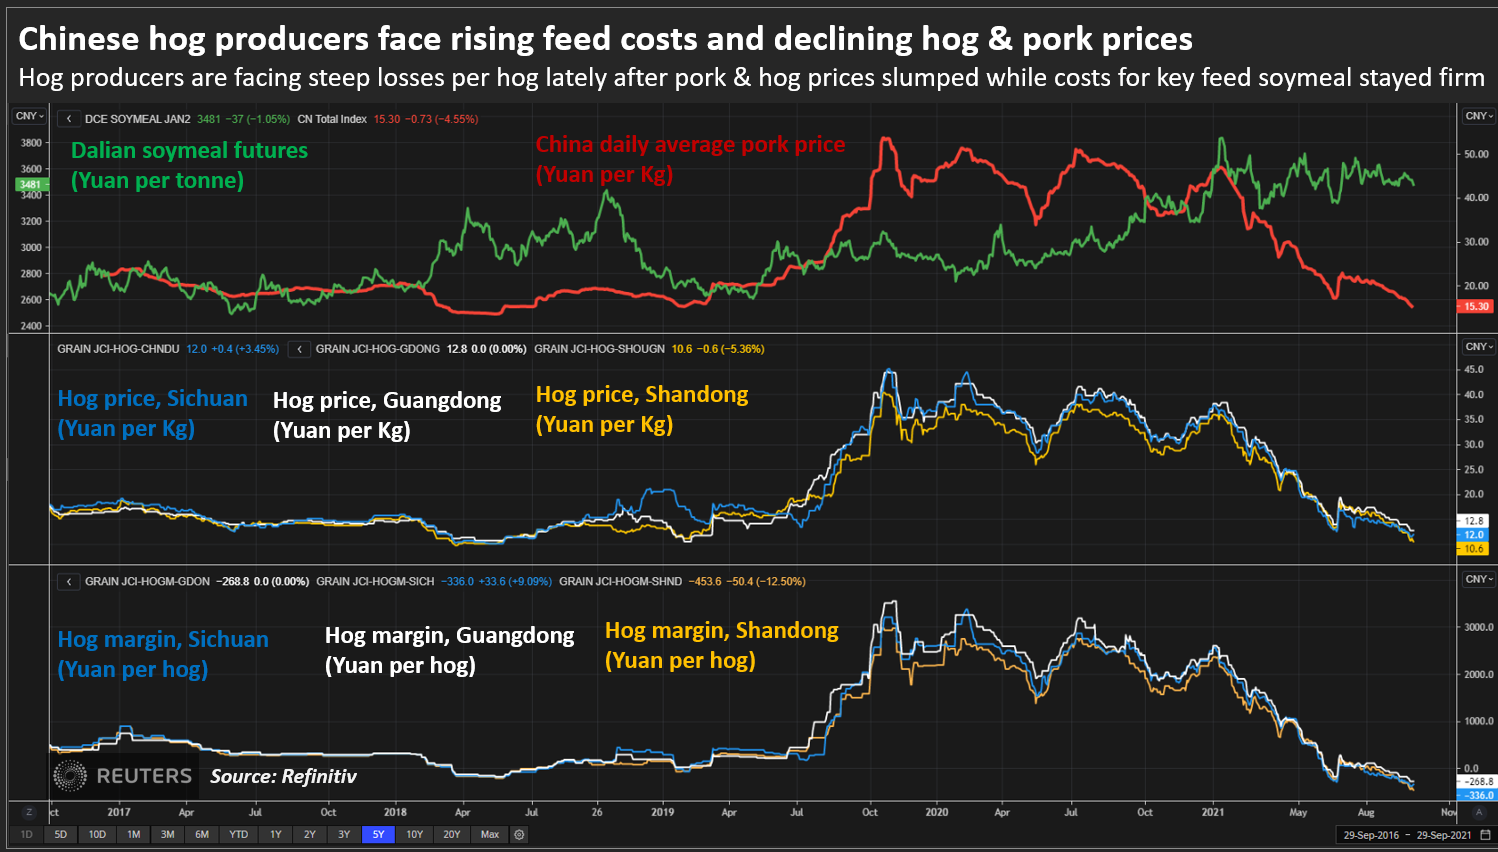 Chinese hog producers face rising feed costs and declining hog & pork prices